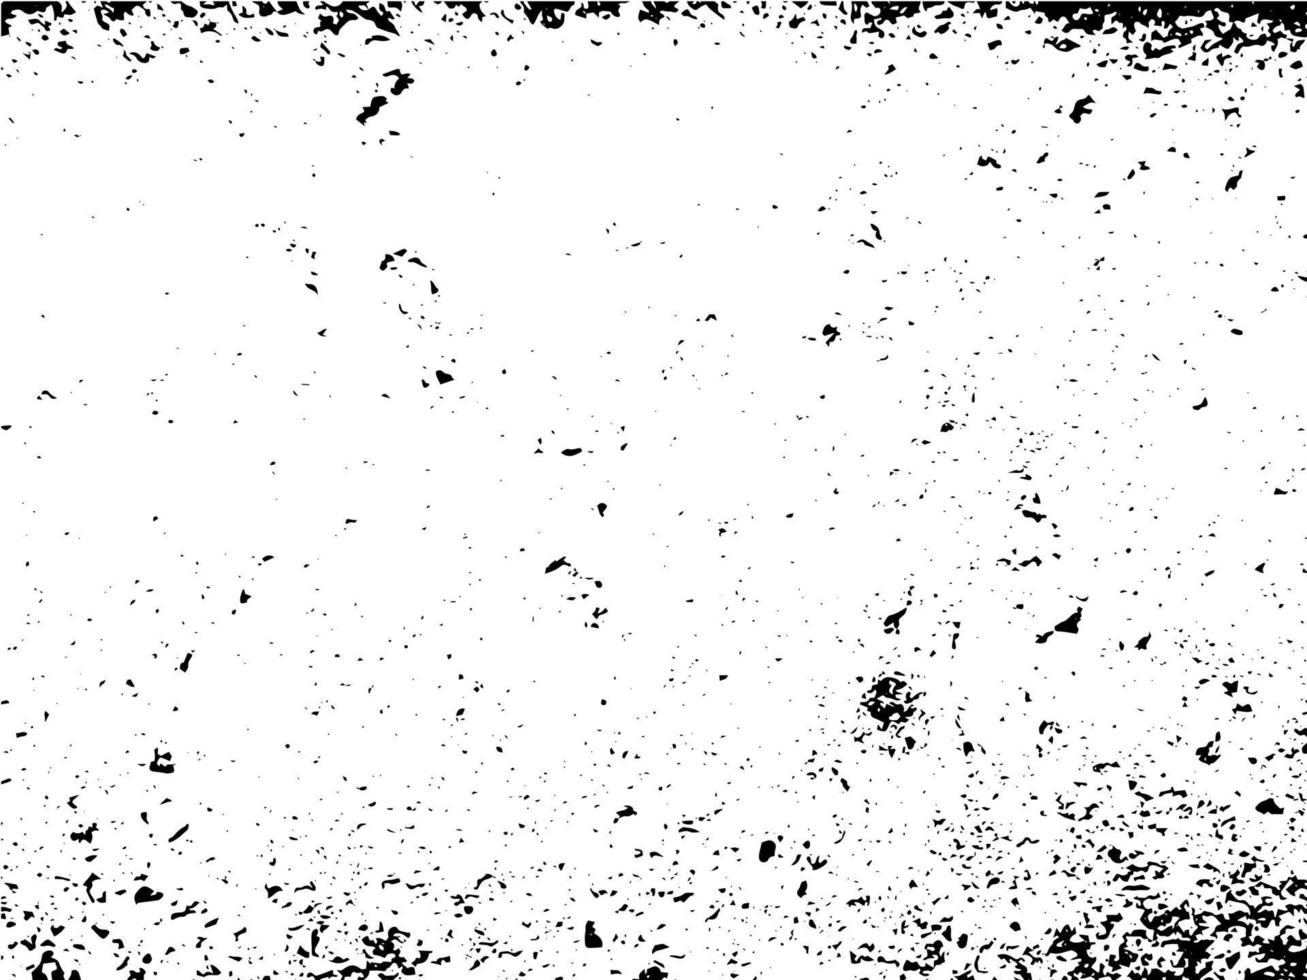 Grunge grainy dirty texture. Abstract urban distress overlay background. Vector illustration